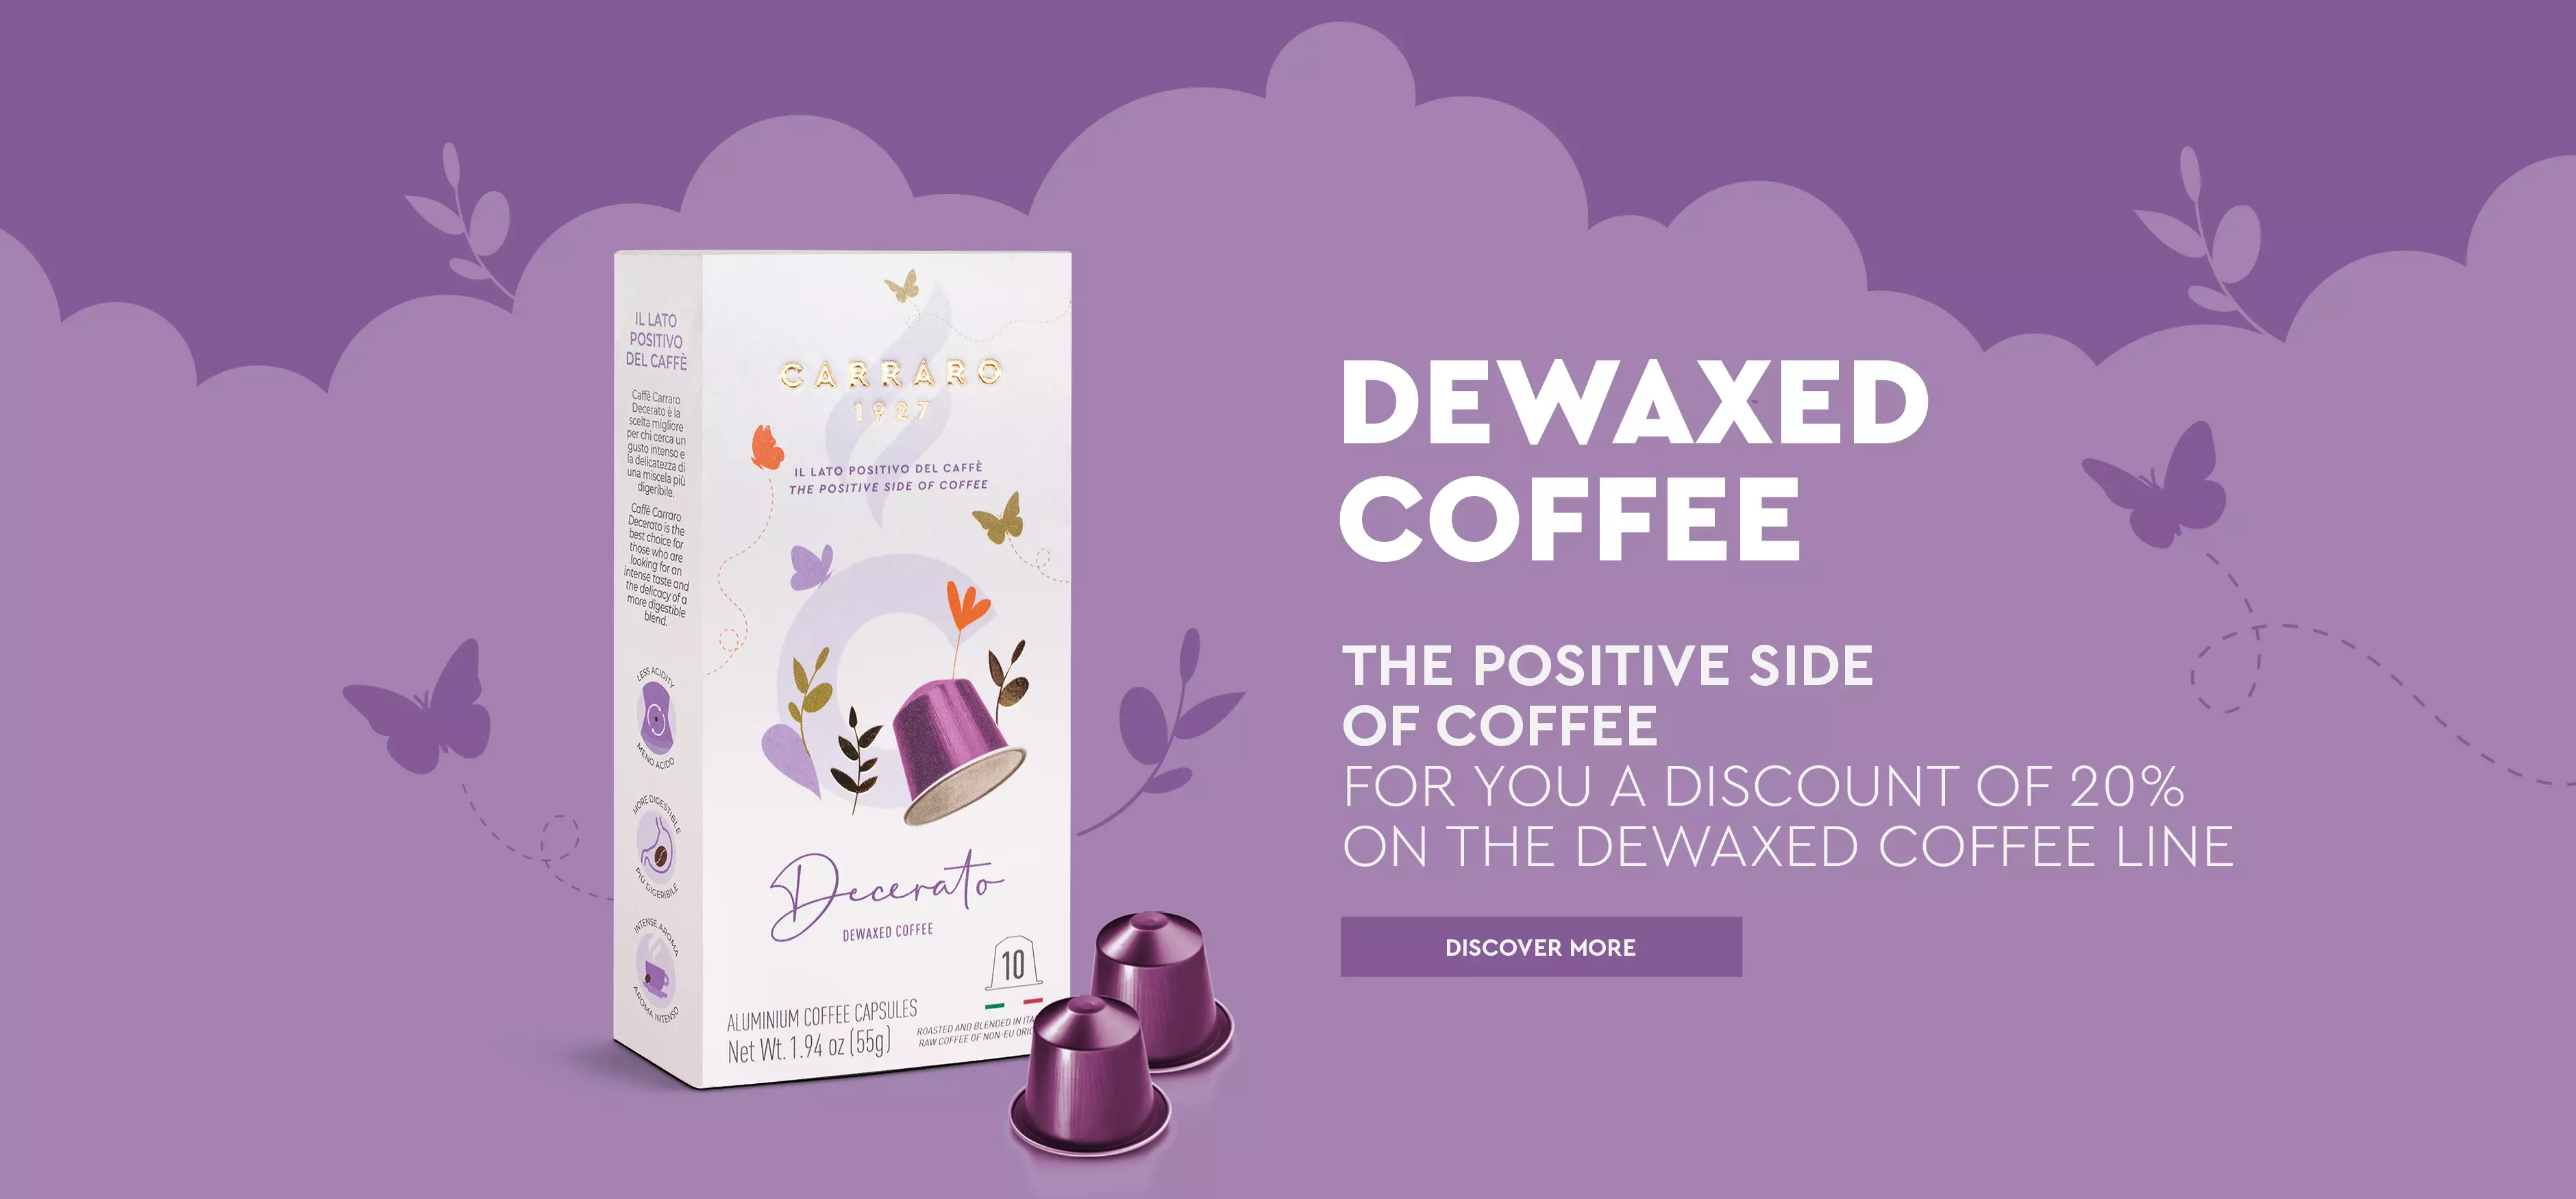 Dewaxed coffee - The positive side of coffee